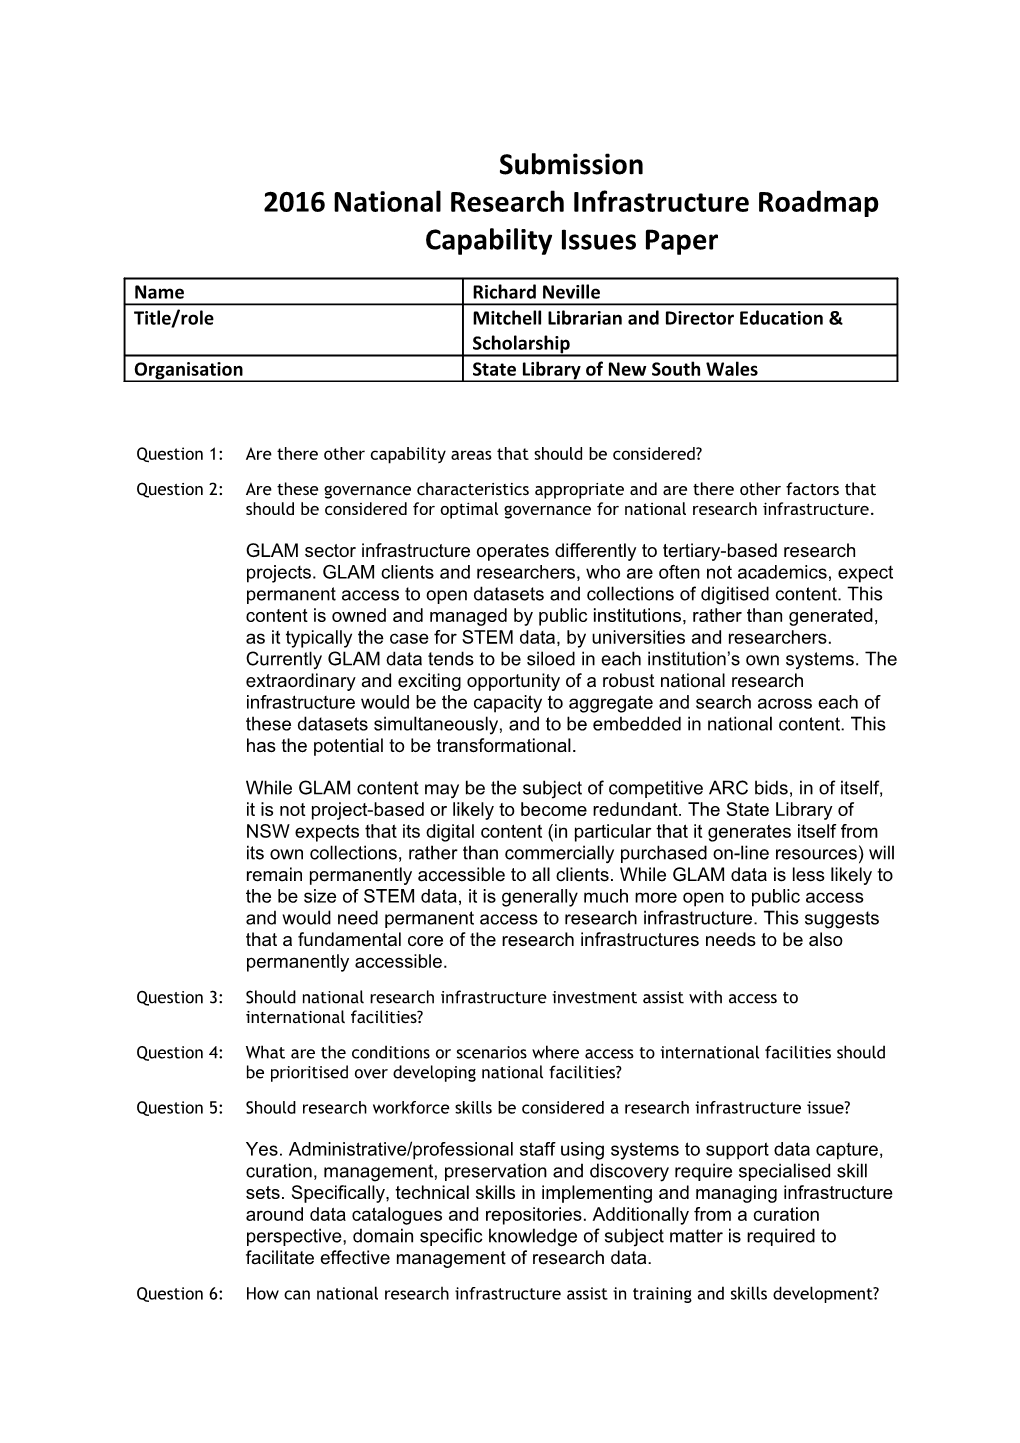 Submission2016 National Research Infrastructure Roadmap Capabilityissues Paper